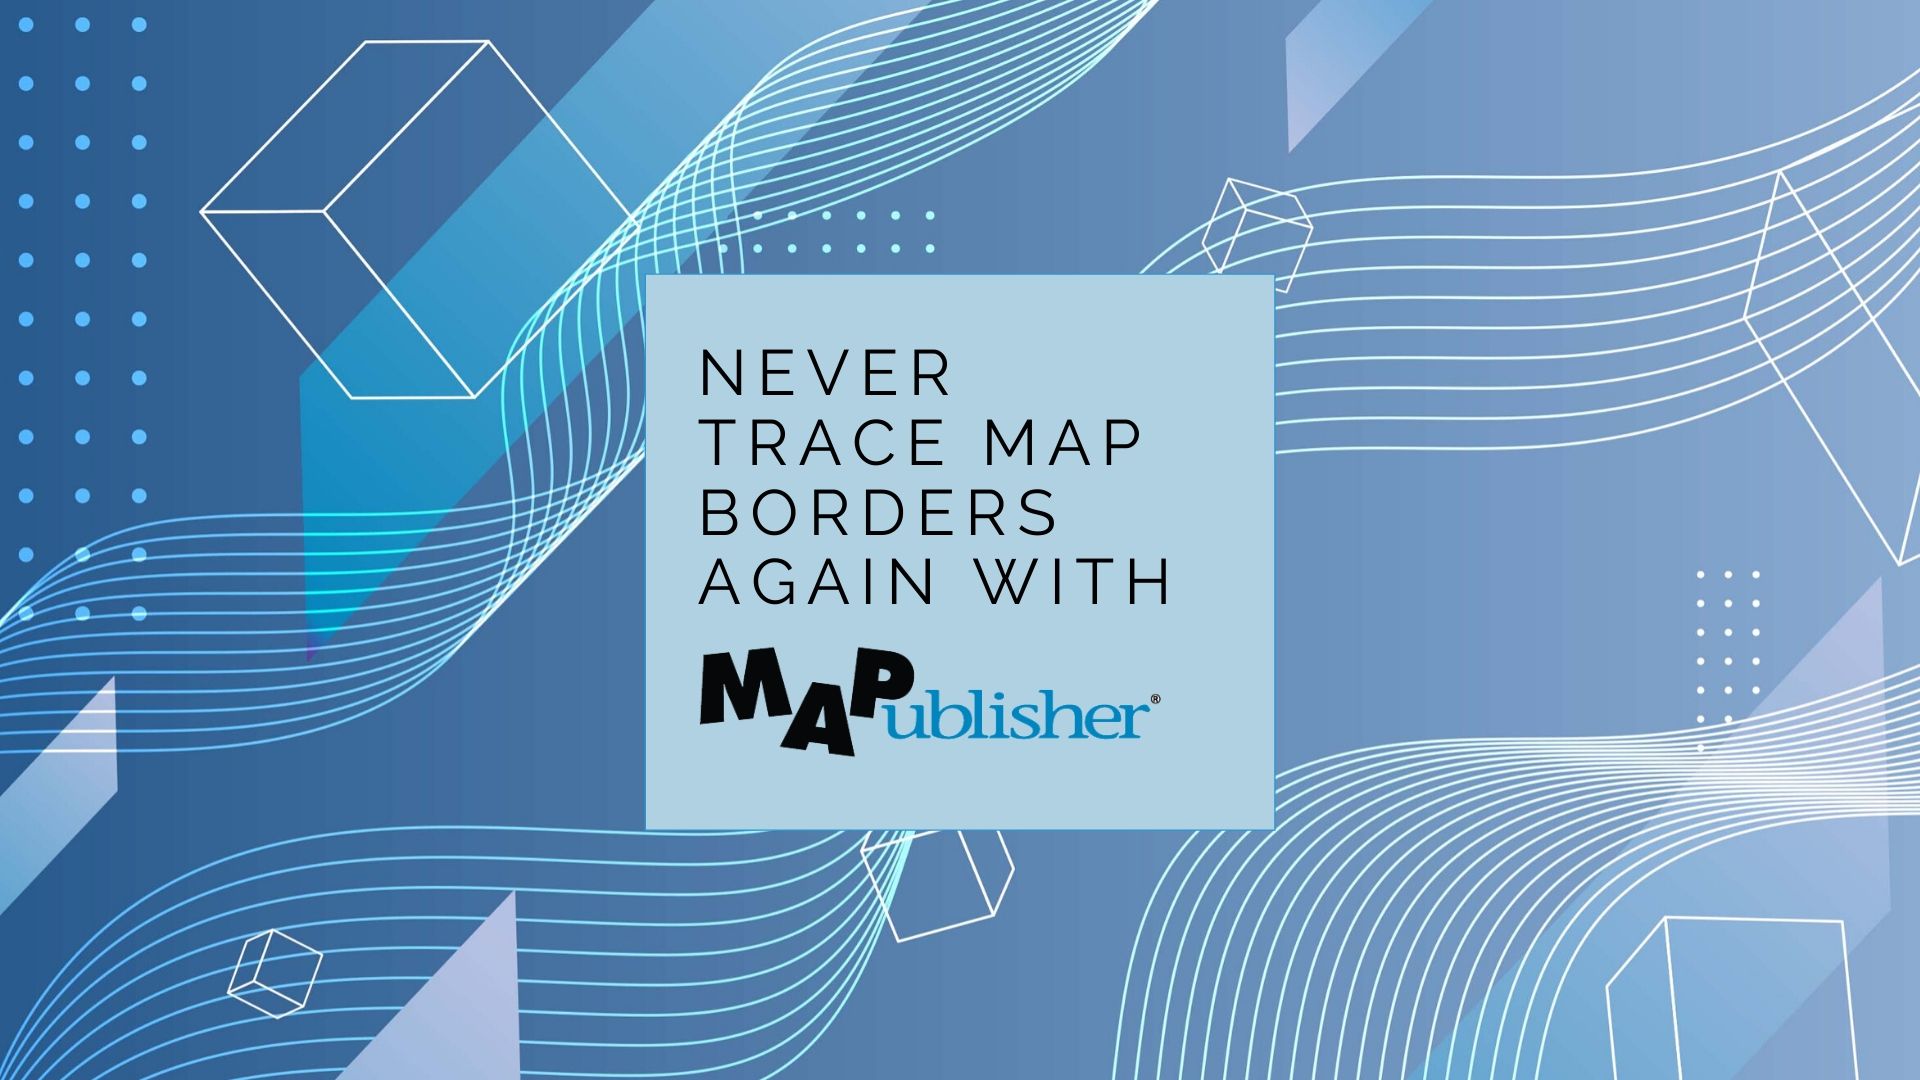 Never trace map borders again with MAPublisher